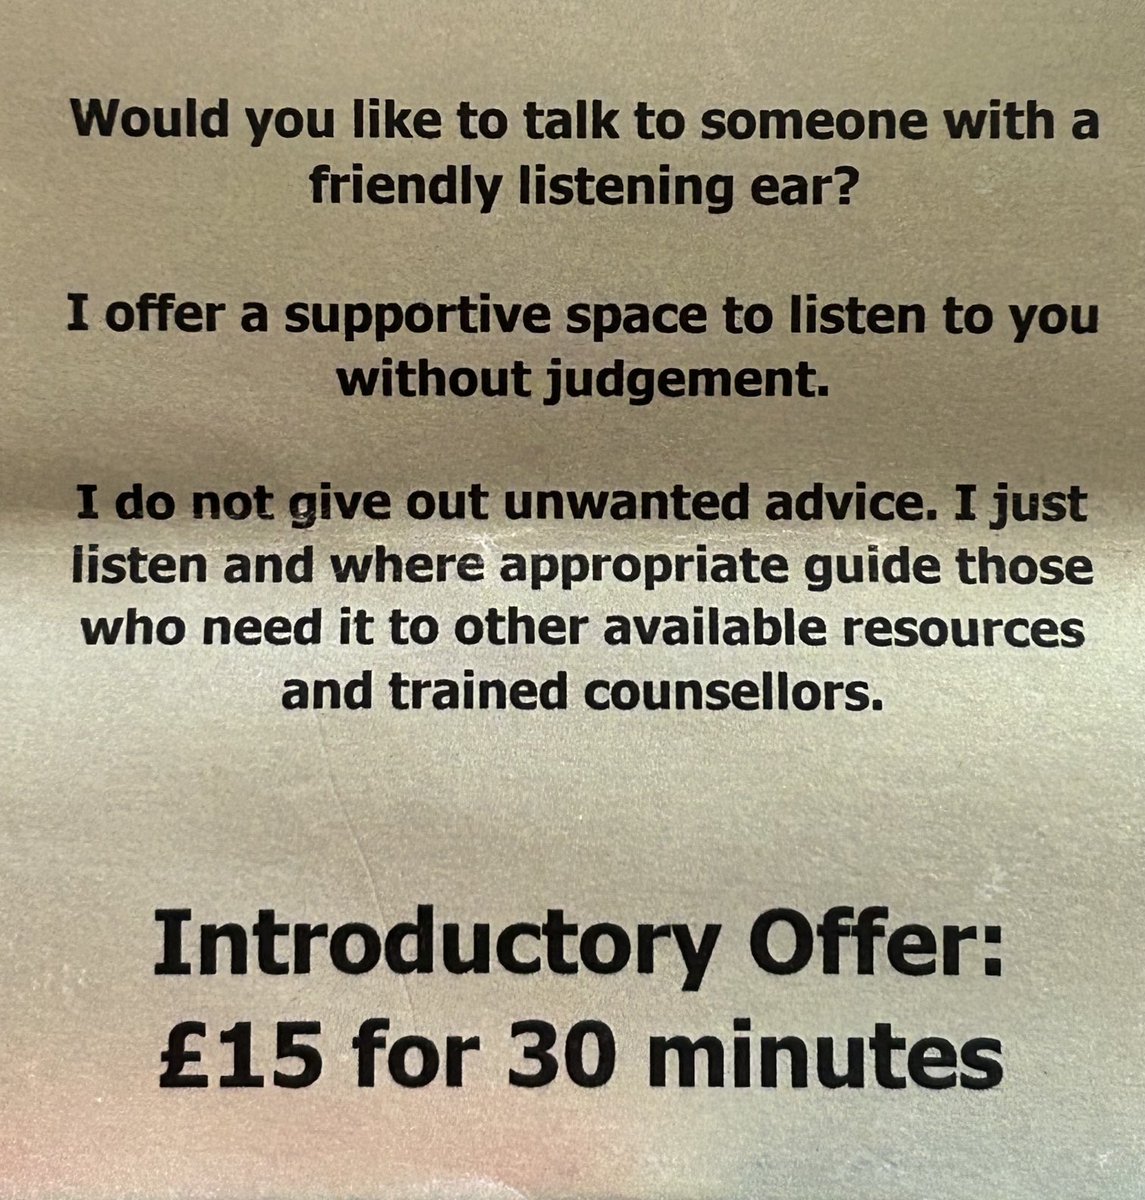 Just come across a flier offering the services of an 'empathetic listener'. Thinking of starting up an 'attentive listener' business - £12 for 30 mins. 'Inattentive listener' a mere £7.50 - 'I don't really listen but will occasionally interject with 'Say what now?' and 'Really?''